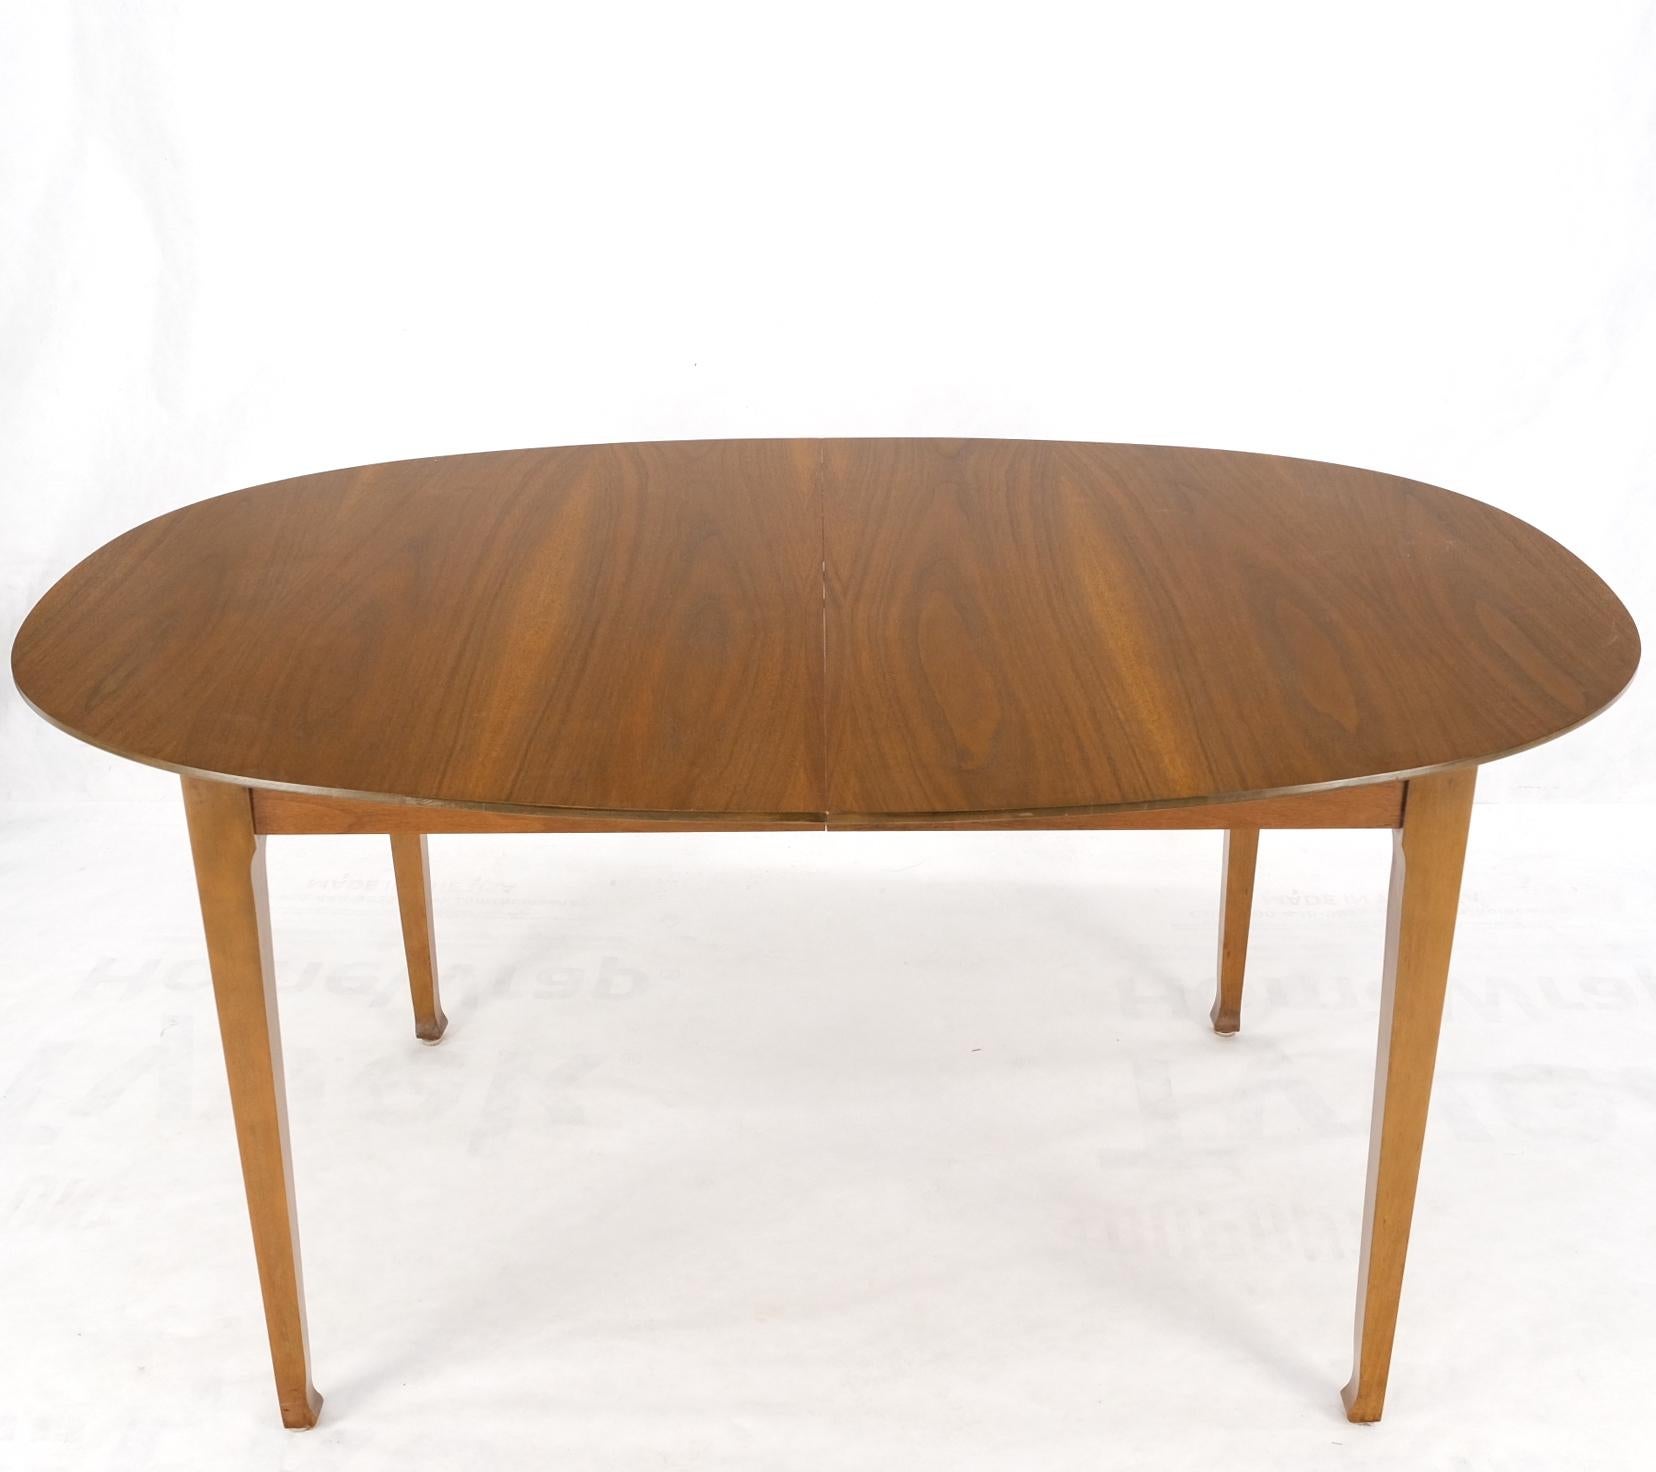 Oval Walnut Square Tapered Legs Mid Century Modern Dining Conference Table Mint For Sale 6